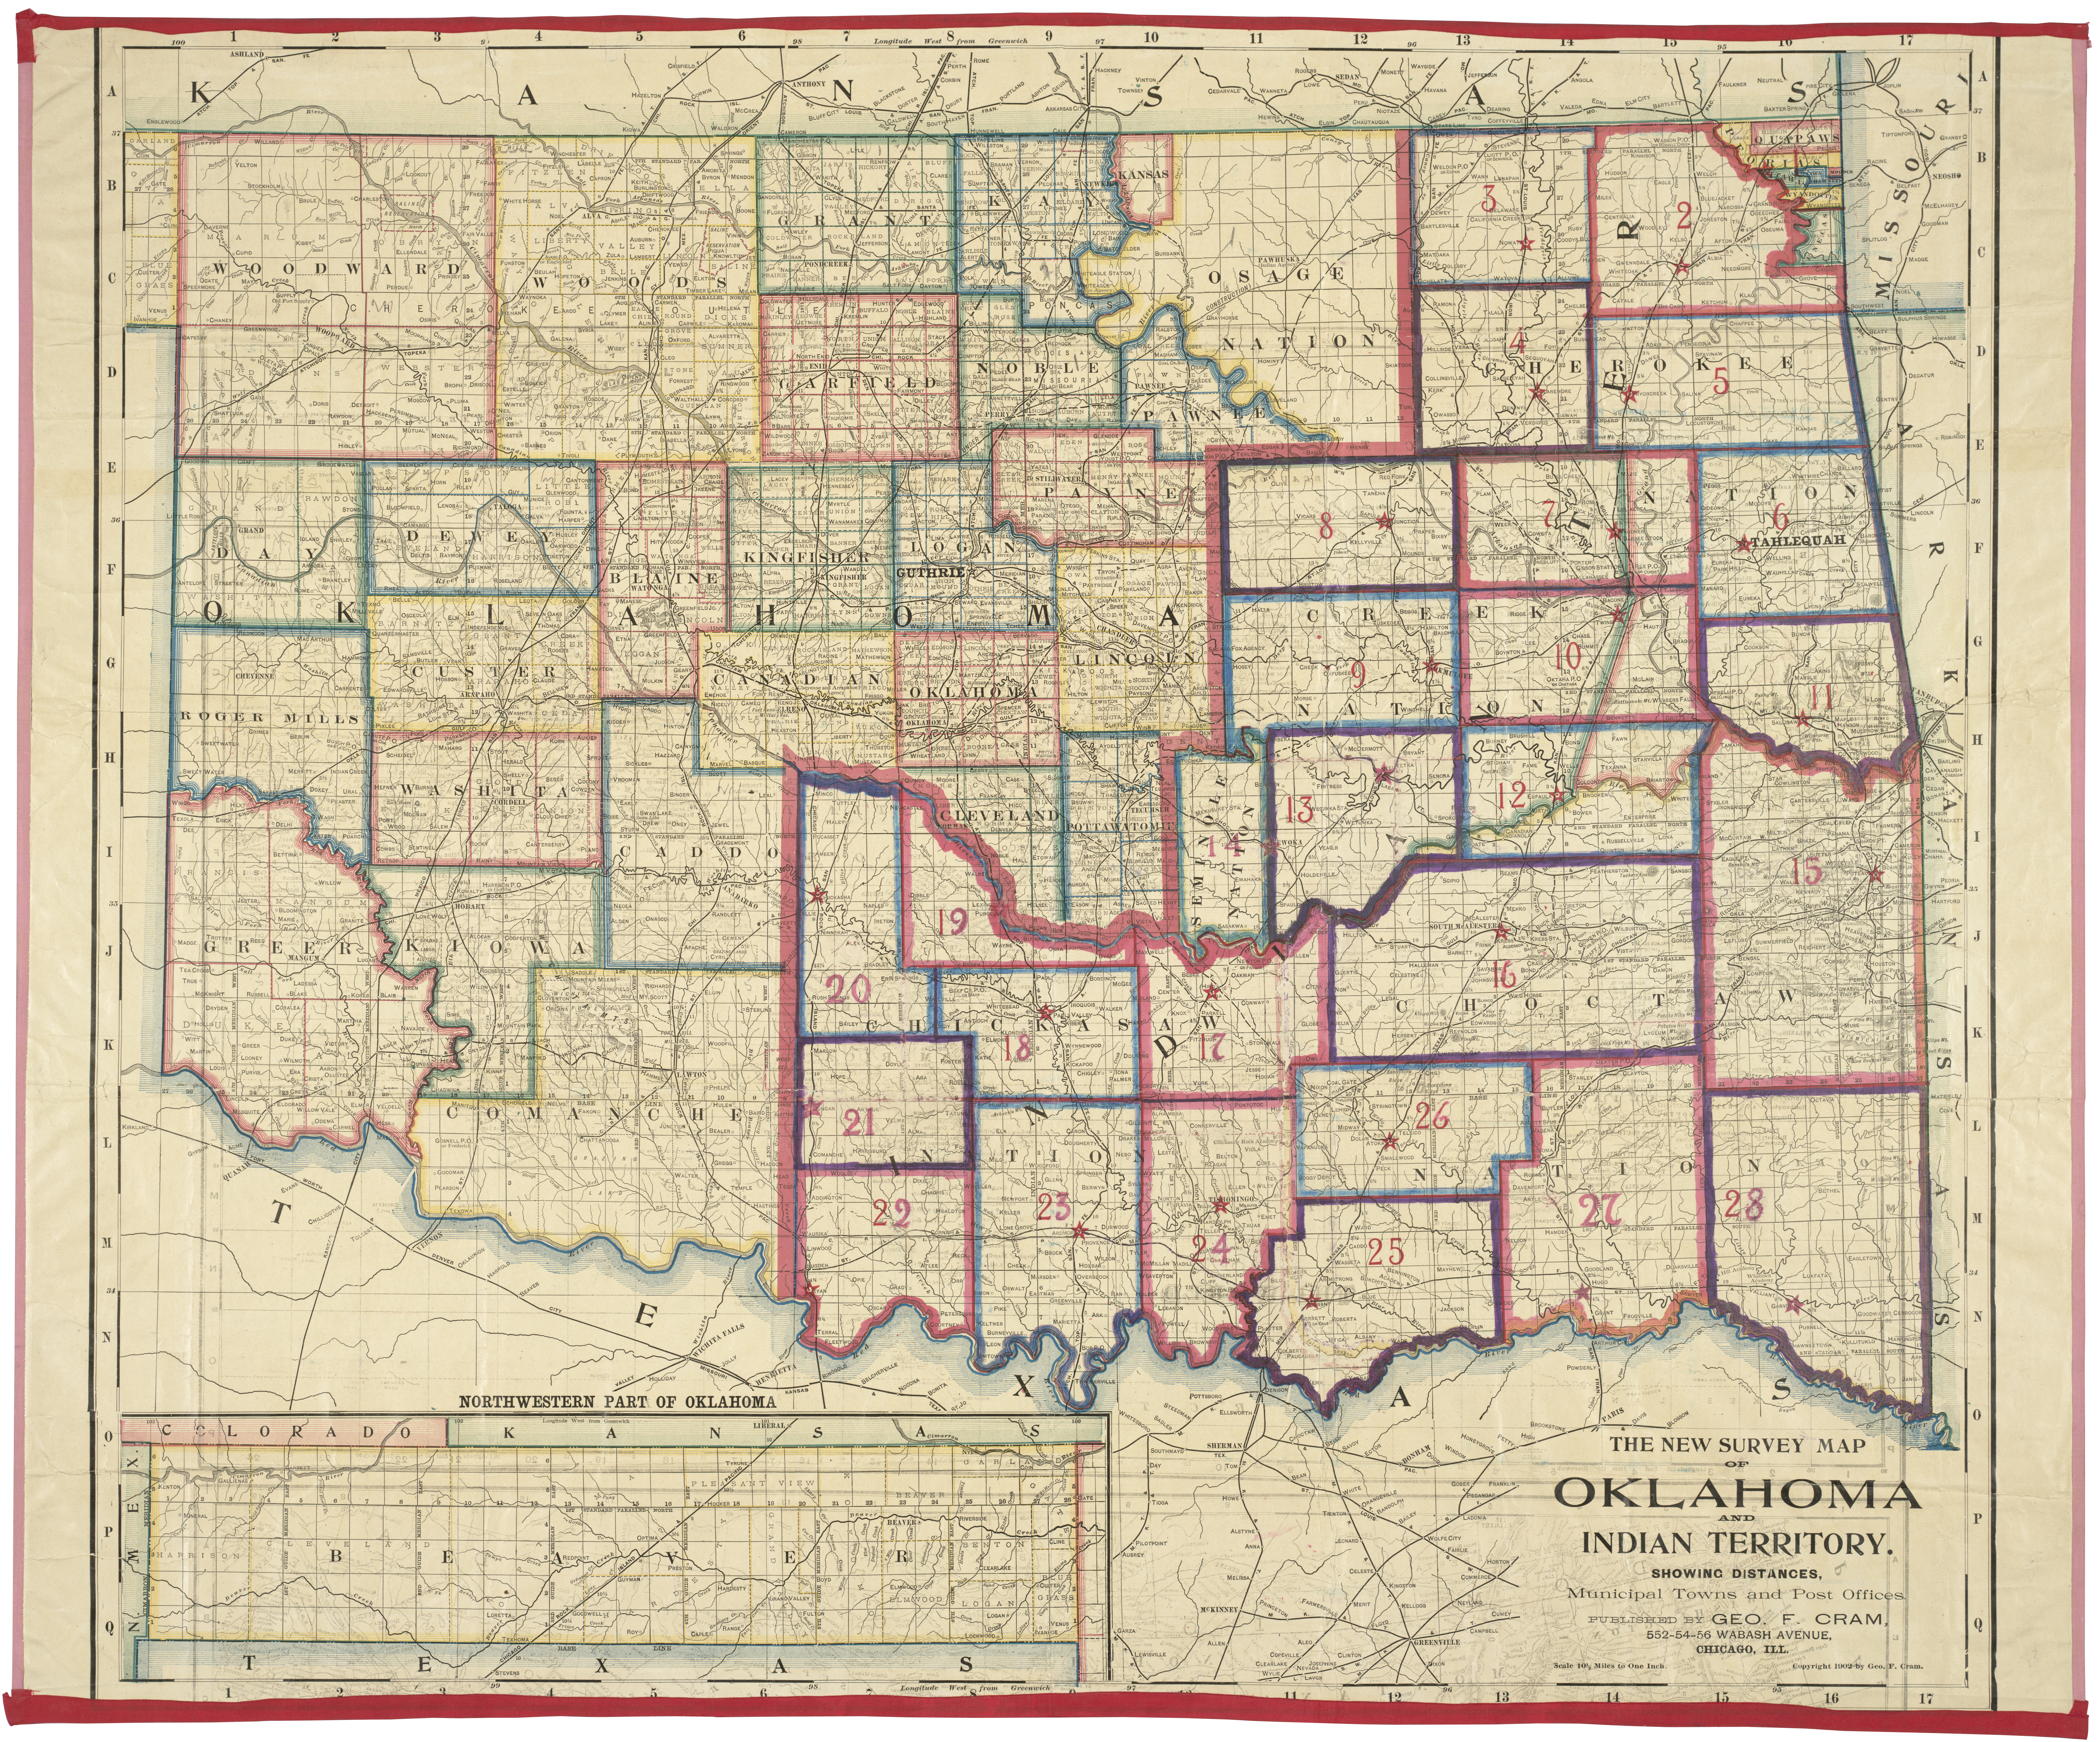 1902 map of Oklahoma and Indian territory – Source: NARA’s Center for Legislative Archives